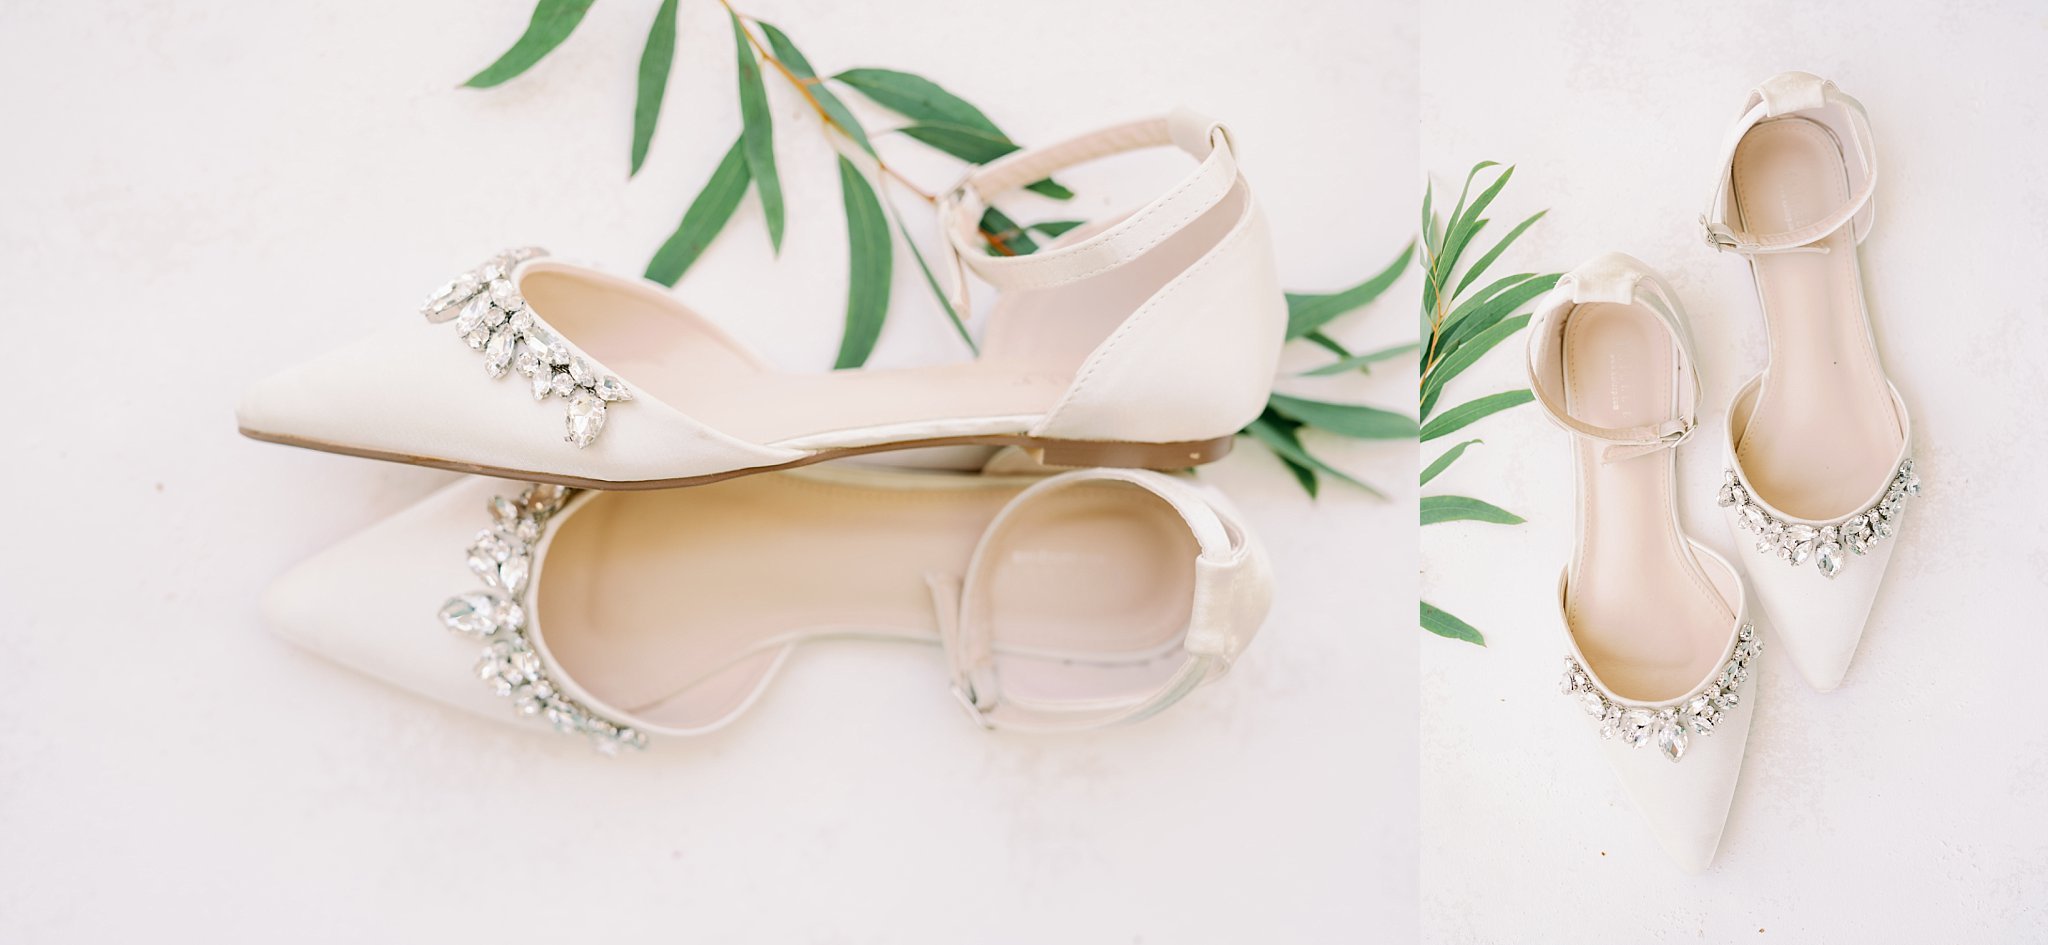 neutral wedding shoes southern wedding inspiration lowcountry wedding inspiration